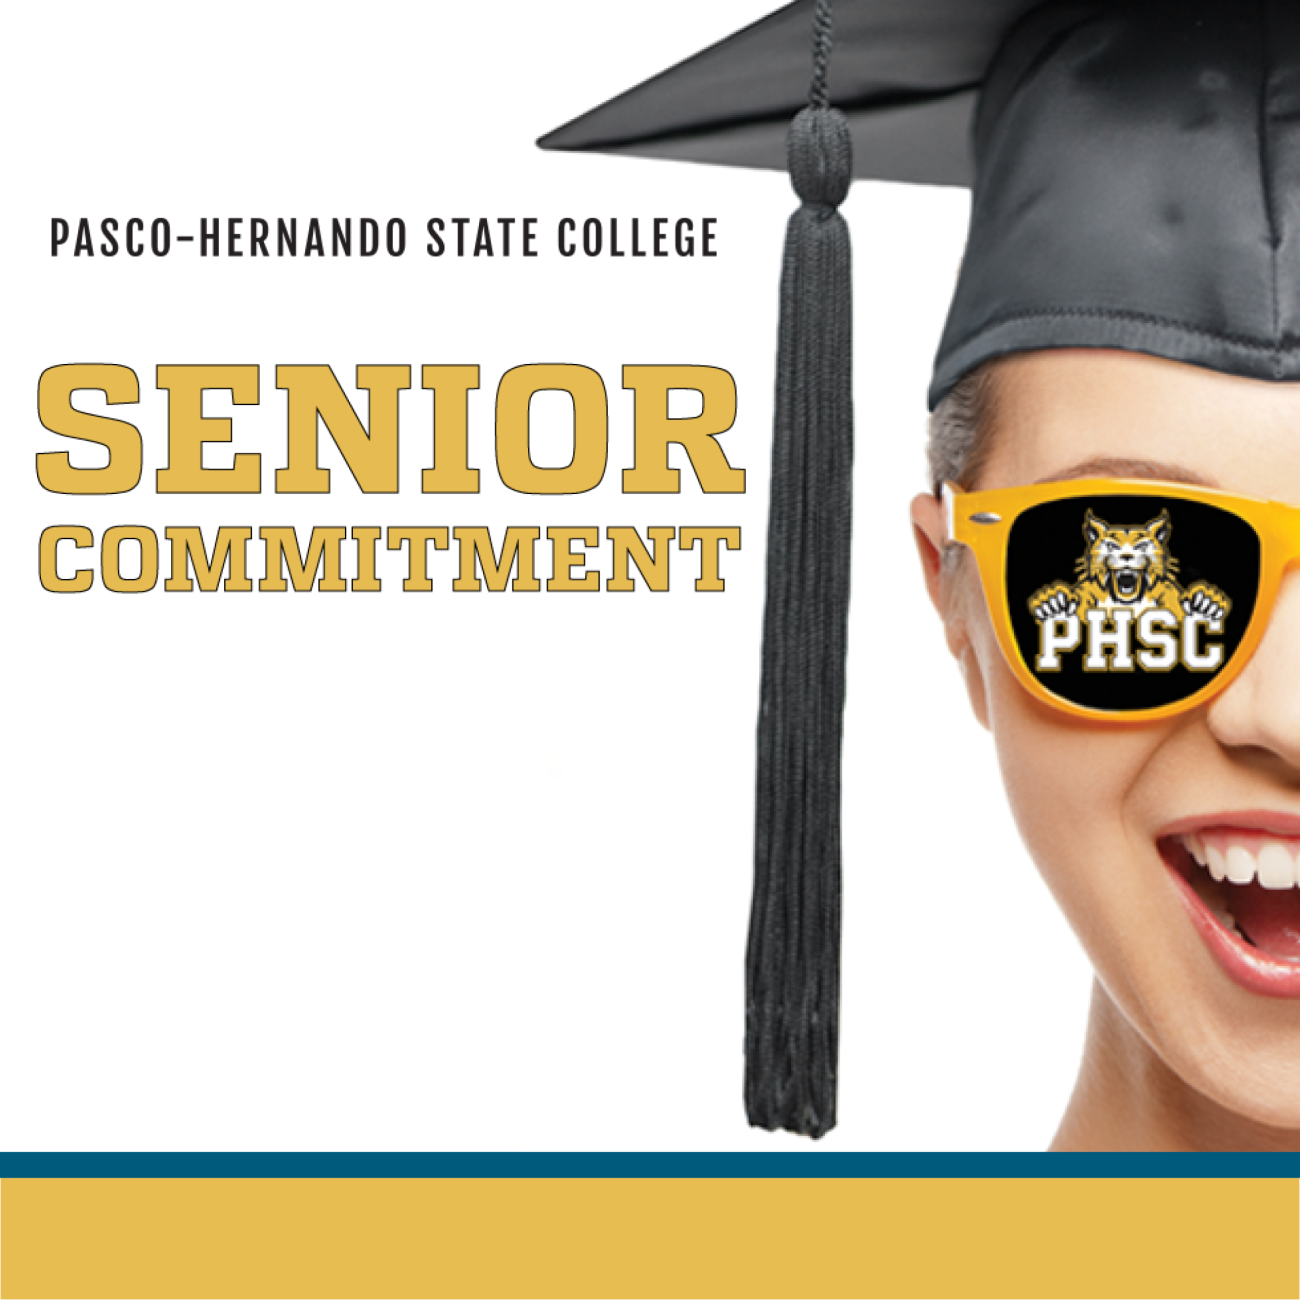 A student with a branded PHSC sunglasses with a graduation cap with the following text: Pasco-Hernando State College Senior Commitment.